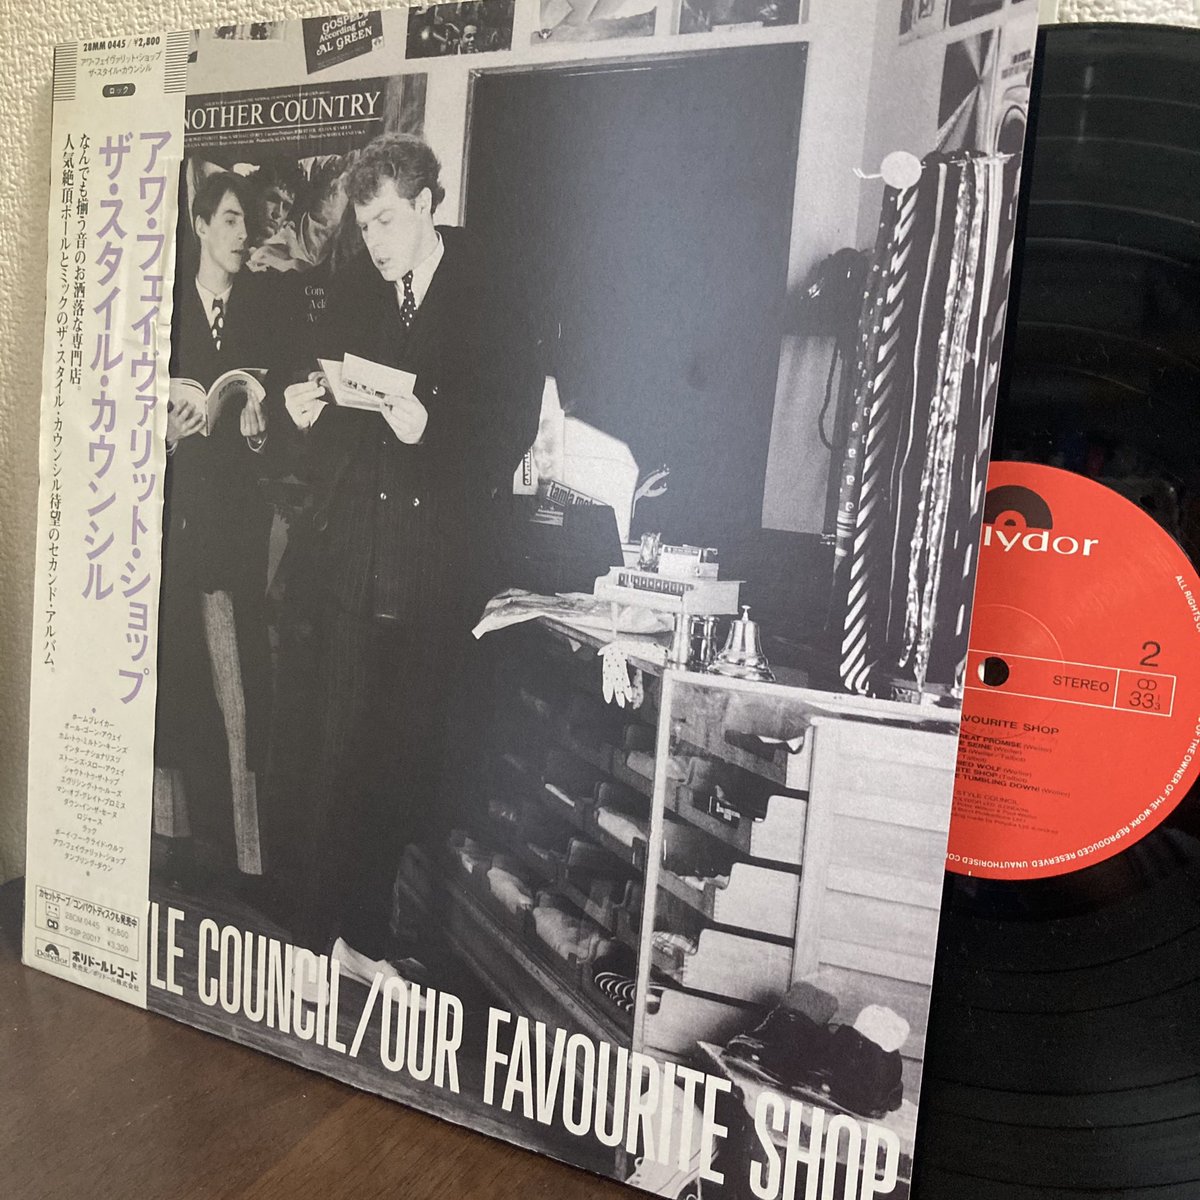 The Style Council - Our Favorite Shop(1985 UK:1 US:123)

#PaulWeller #TheStyleCouncil #レコード